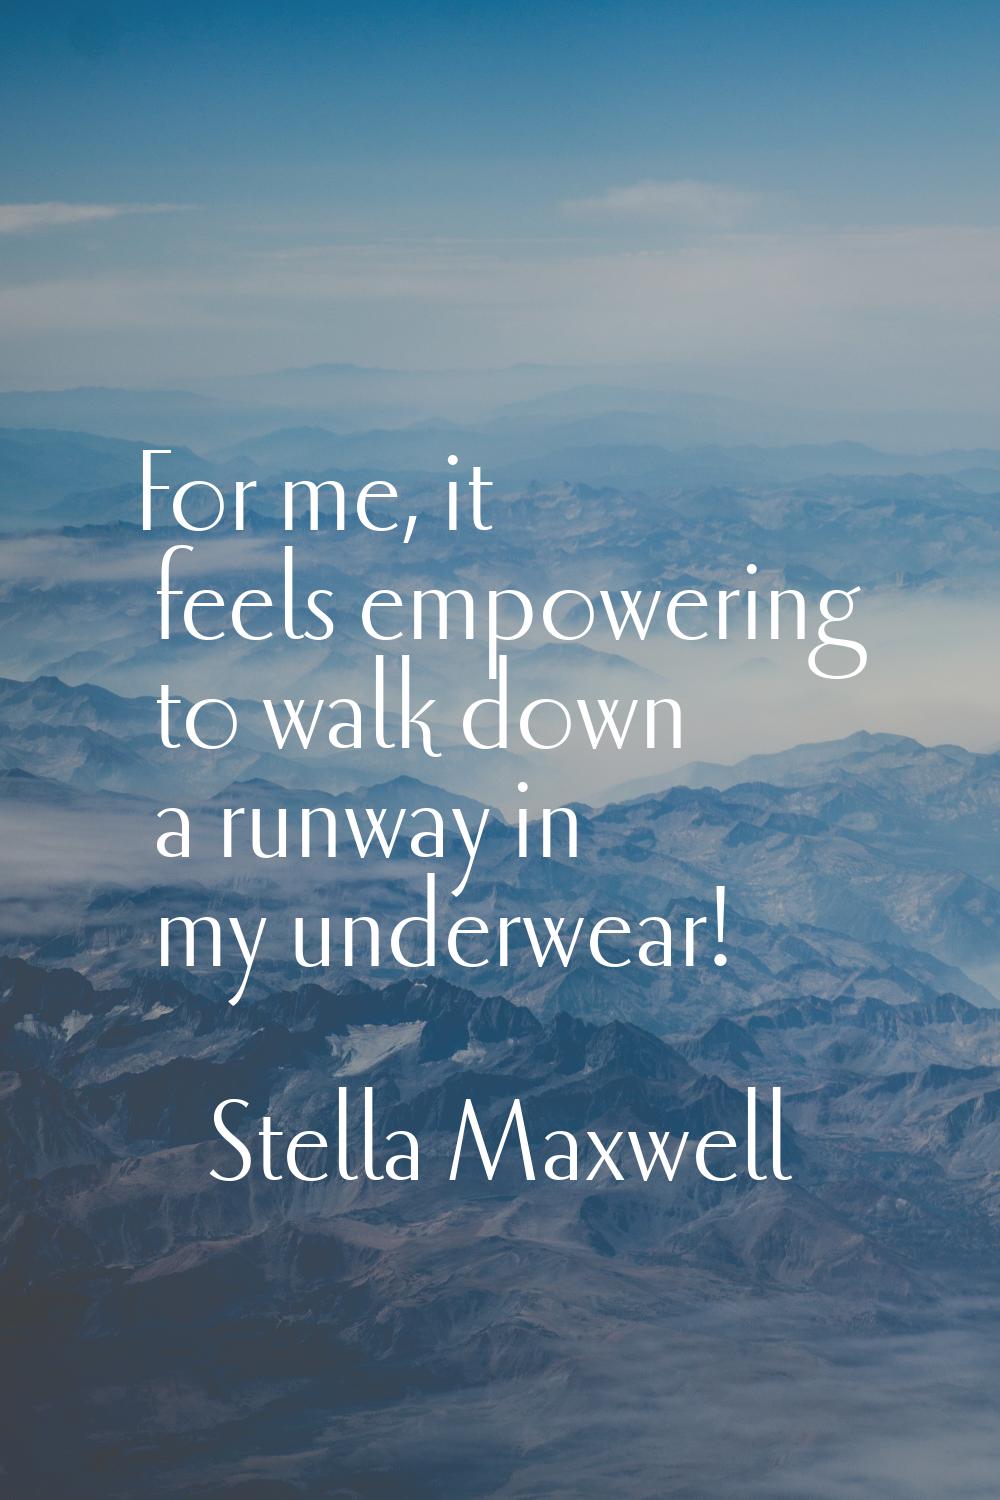 For me, it feels empowering to walk down a runway in my underwear!